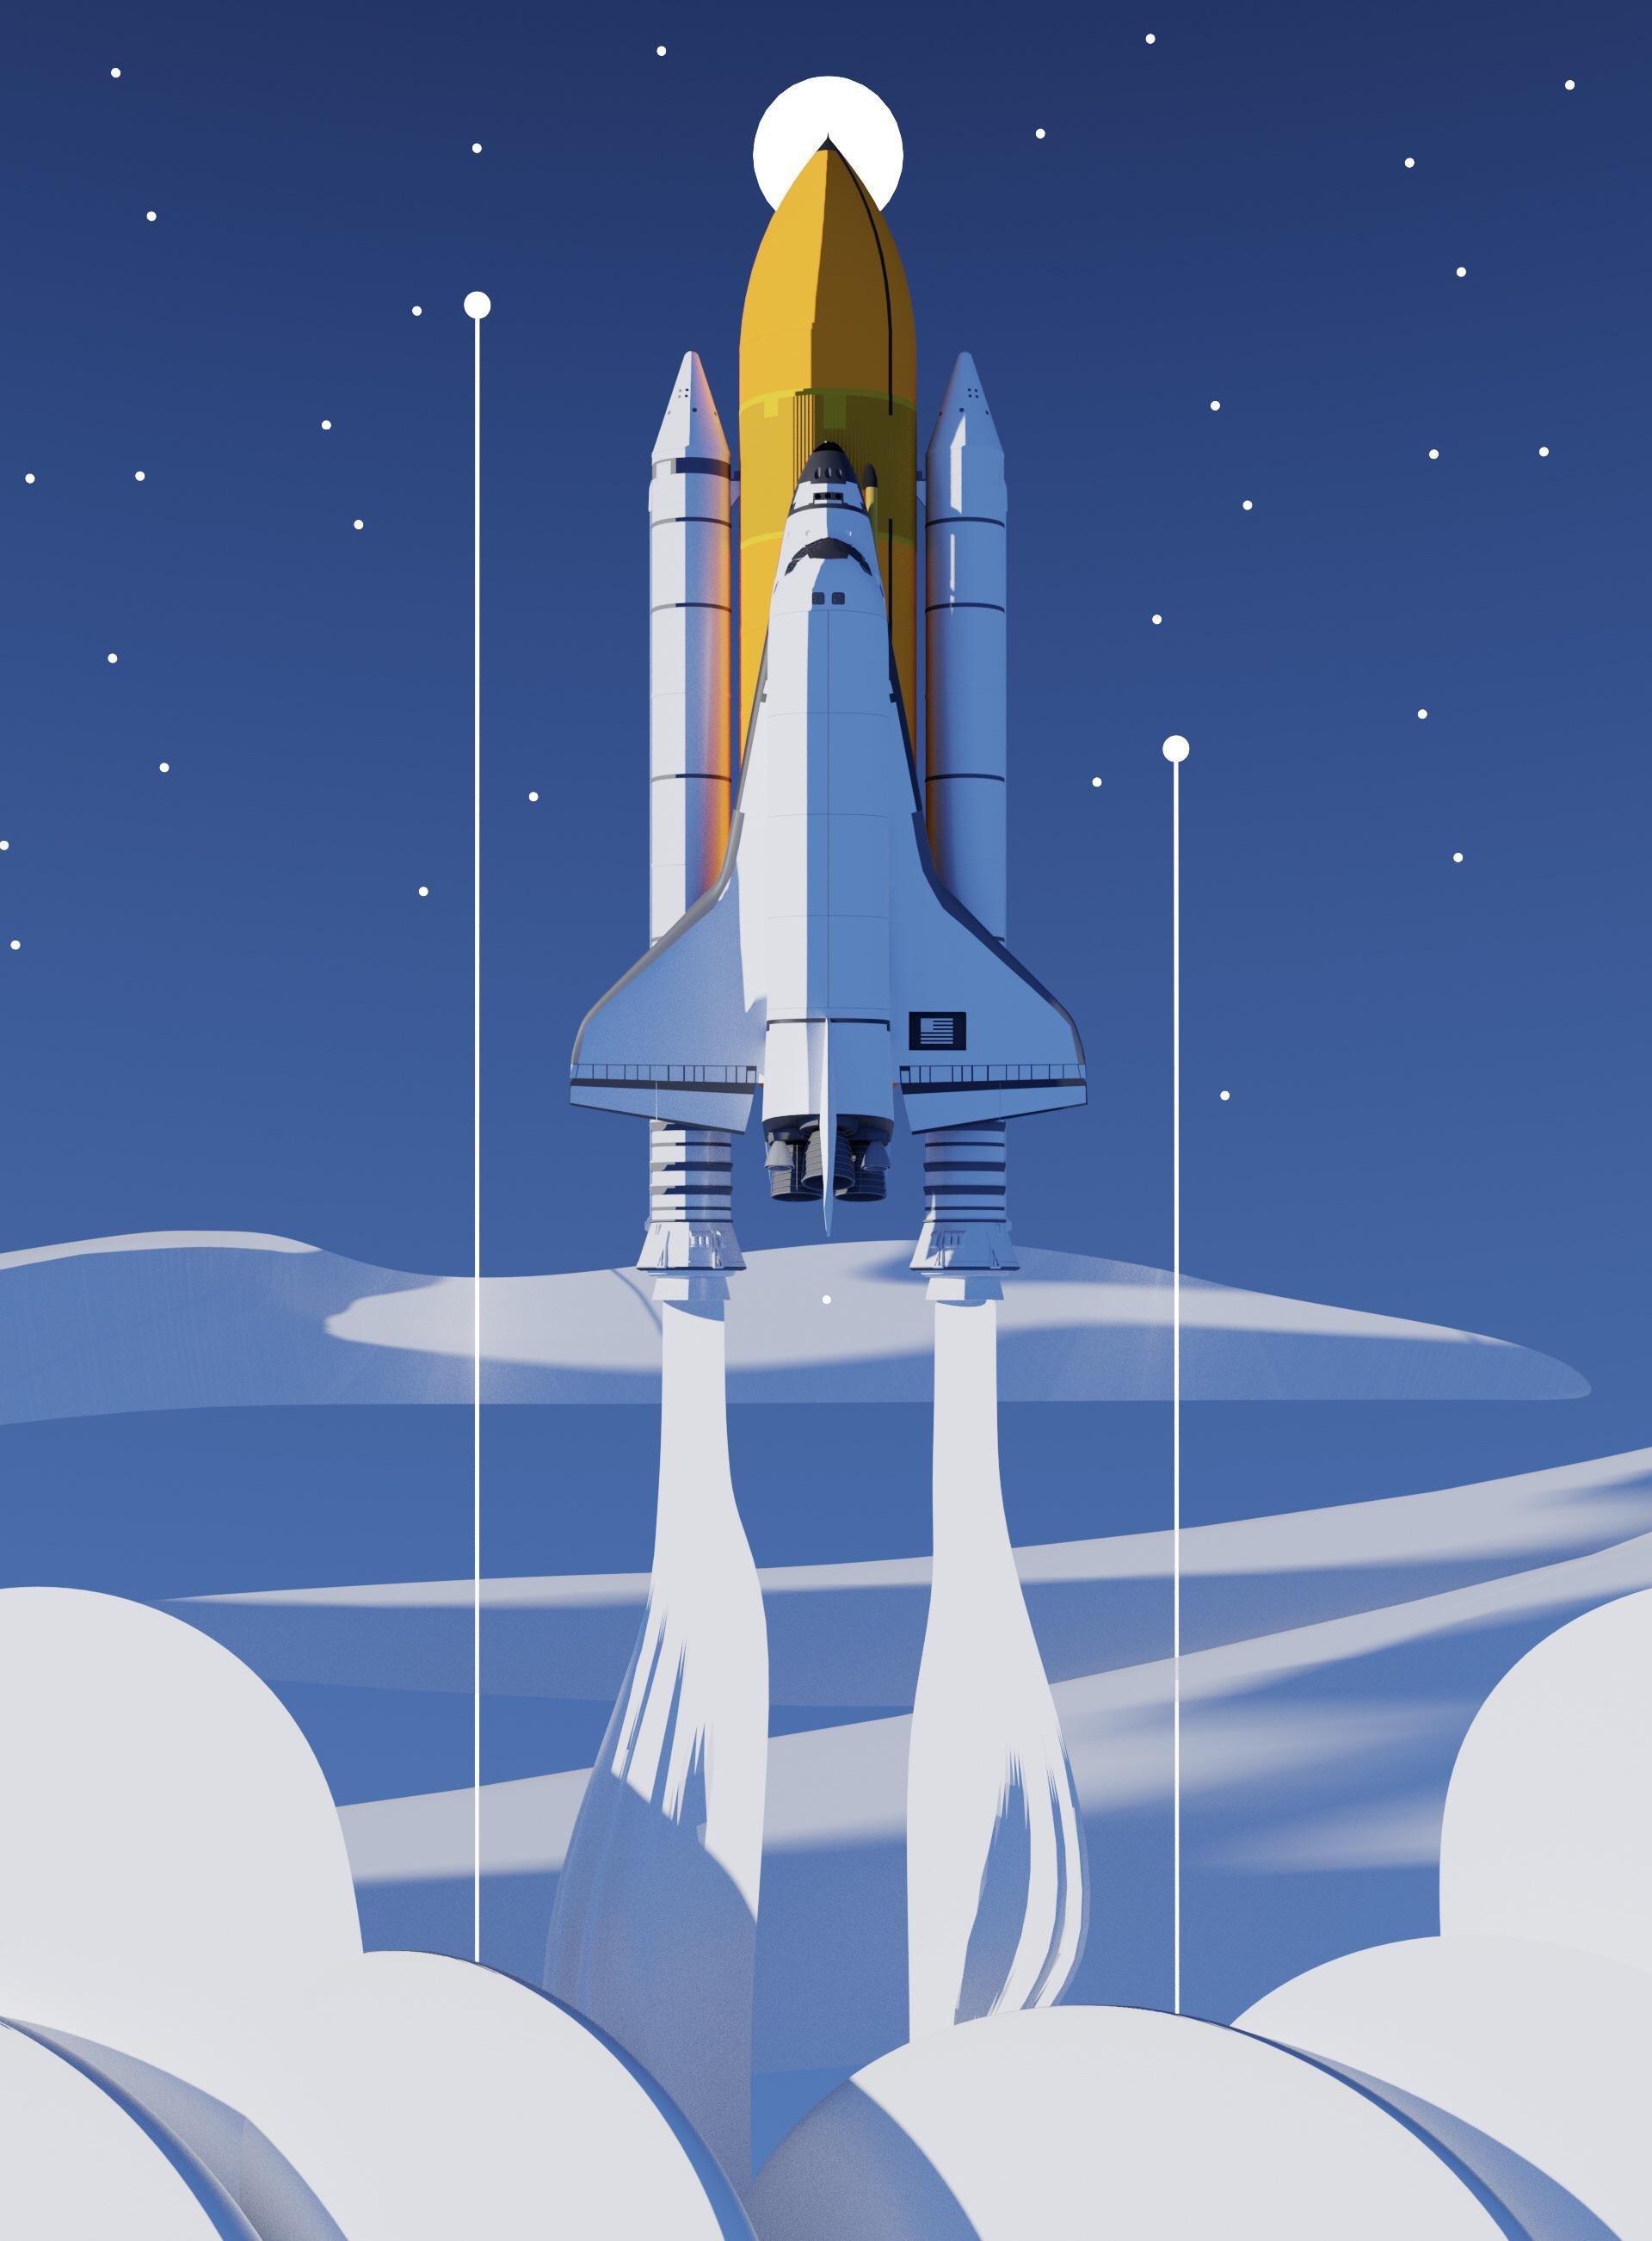 1920x2604 Wallpaper : vehicle, space shuttle, aircraft, rocket, spaceplane, sky, line, spacecraft, aerospace manufacturer, naval architecture, aerospace engineering, symmetry, astronomical object, science, aviation, illustration, electric blue, graphics, drawing ..